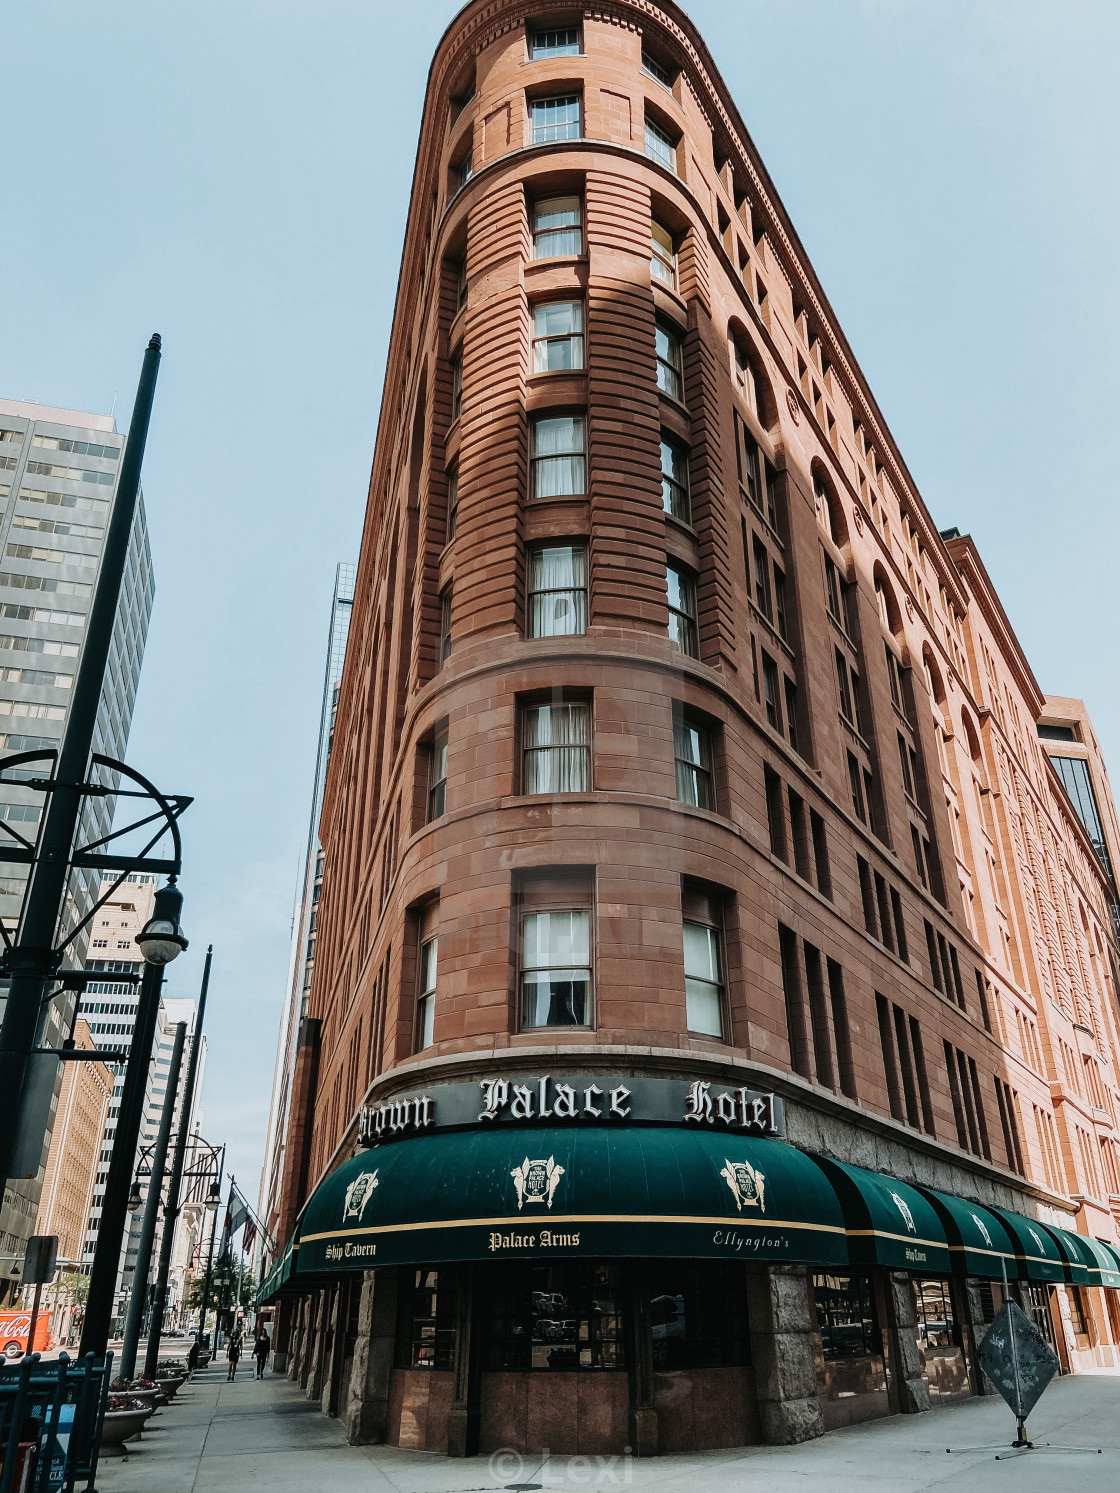 "Brown Palace Hotel" stock image